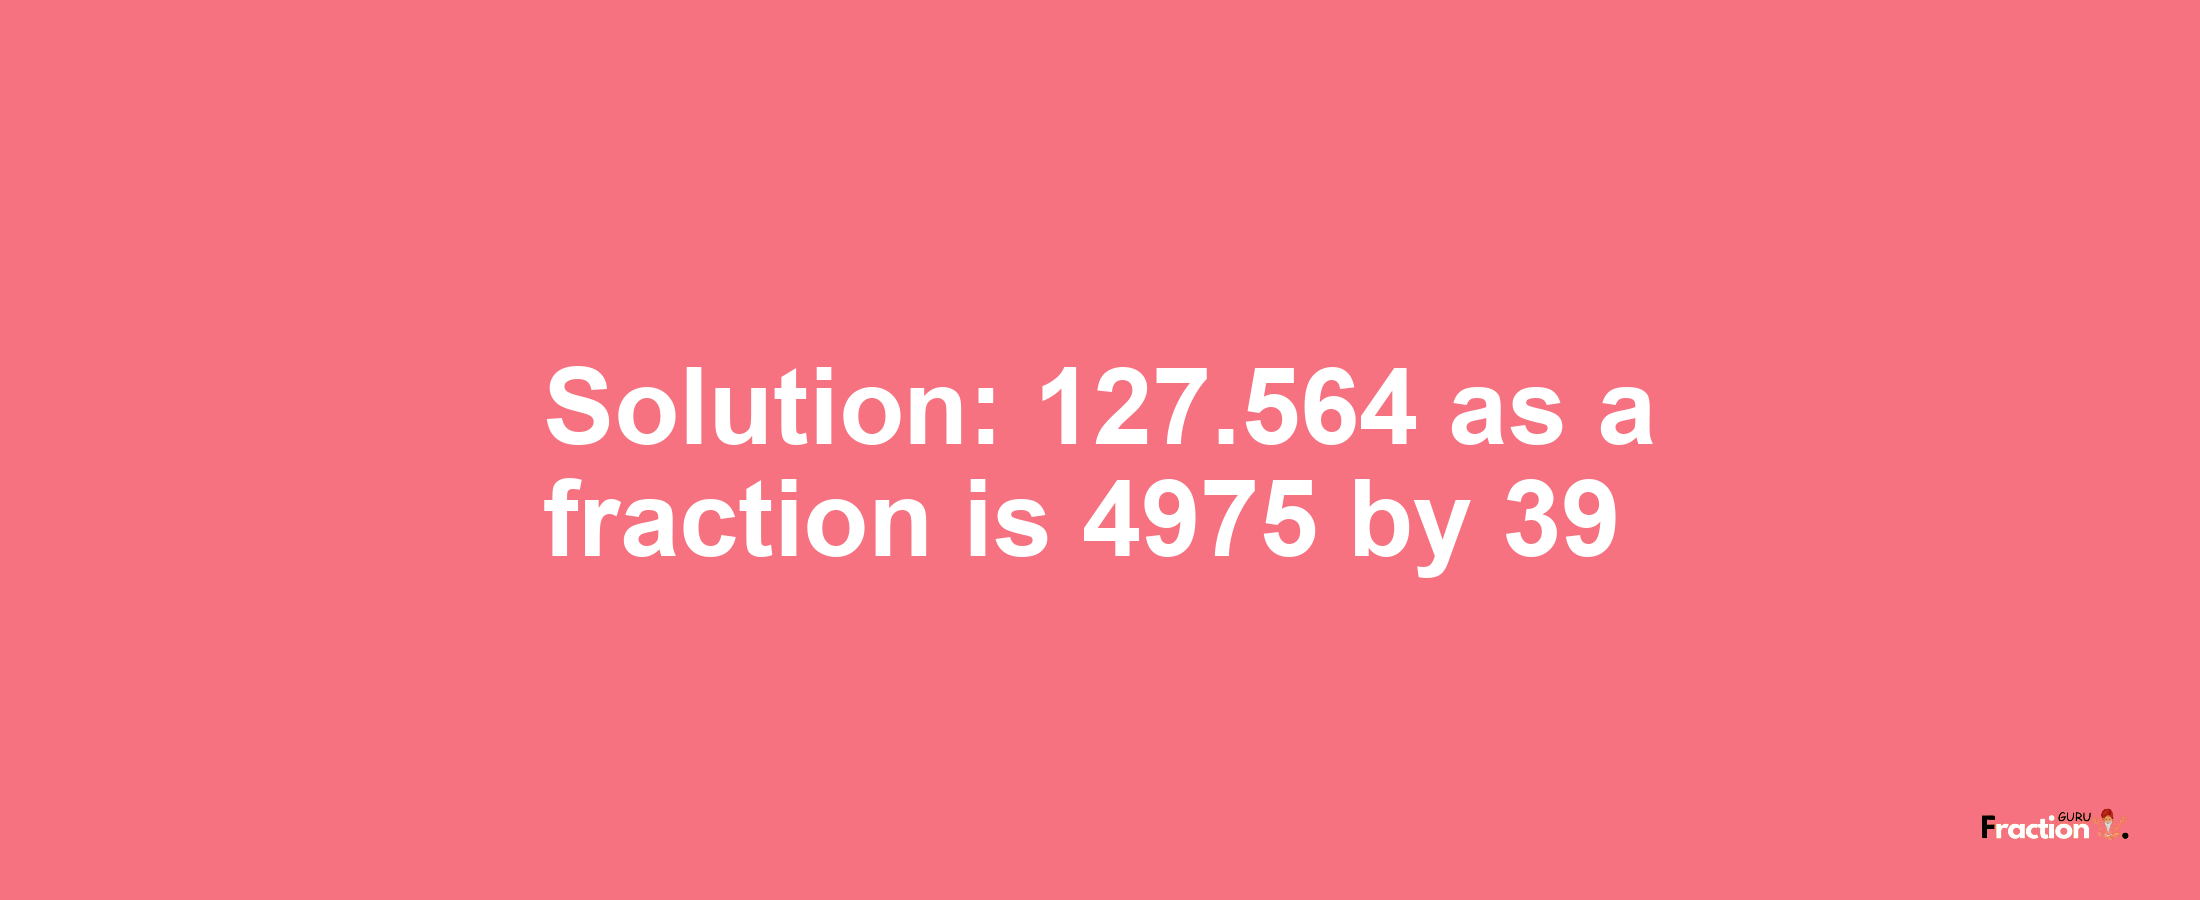 Solution:127.564 as a fraction is 4975/39